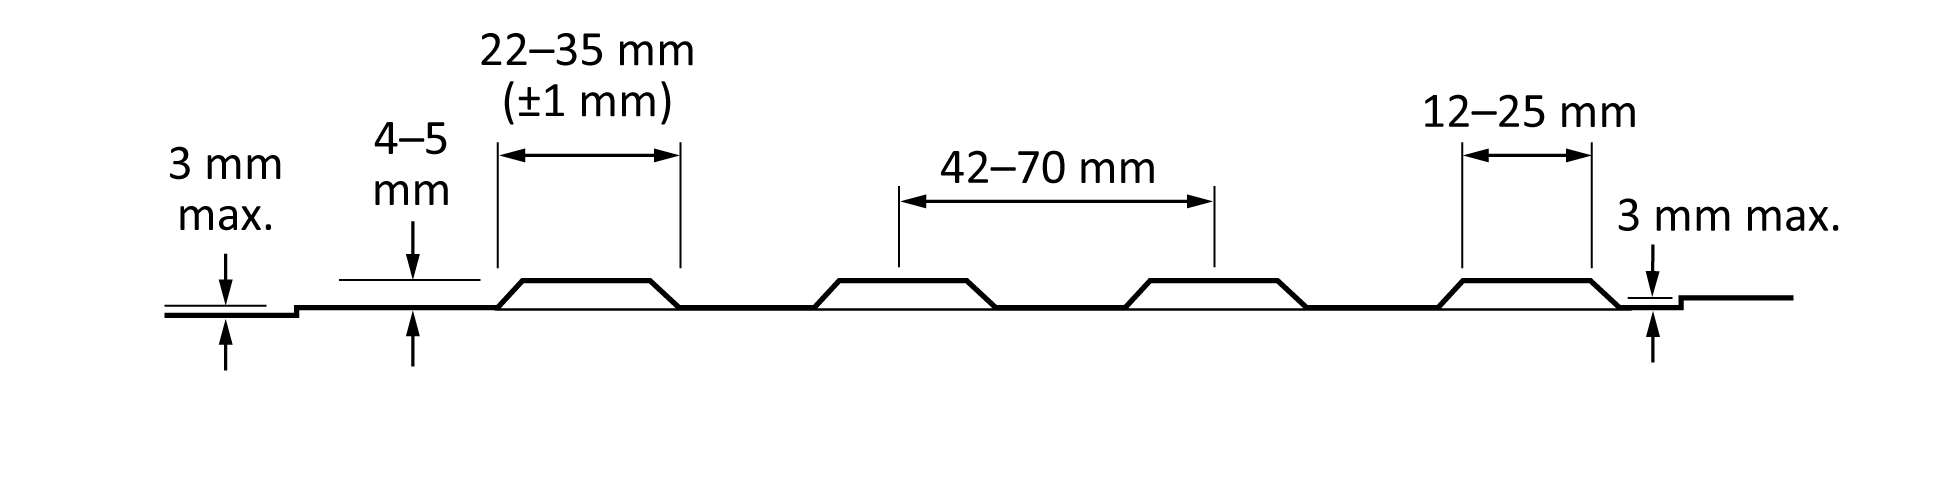 The figure shows a cross-cut illustration of truncated domes. The difference between the base surface level and the surface to which the domes are applied is labelled as a maximum 3 mm. Also labelled are the 4 mm to 5 mm maximum height of the dome, the 22 mm to 35 mm (±1 mm) maximum width of the base of each dome, the 12 mm to 25 mm maximum width of the top of each dome, and the 42 mm to 70 mm maximum distance between the centres of the domes.